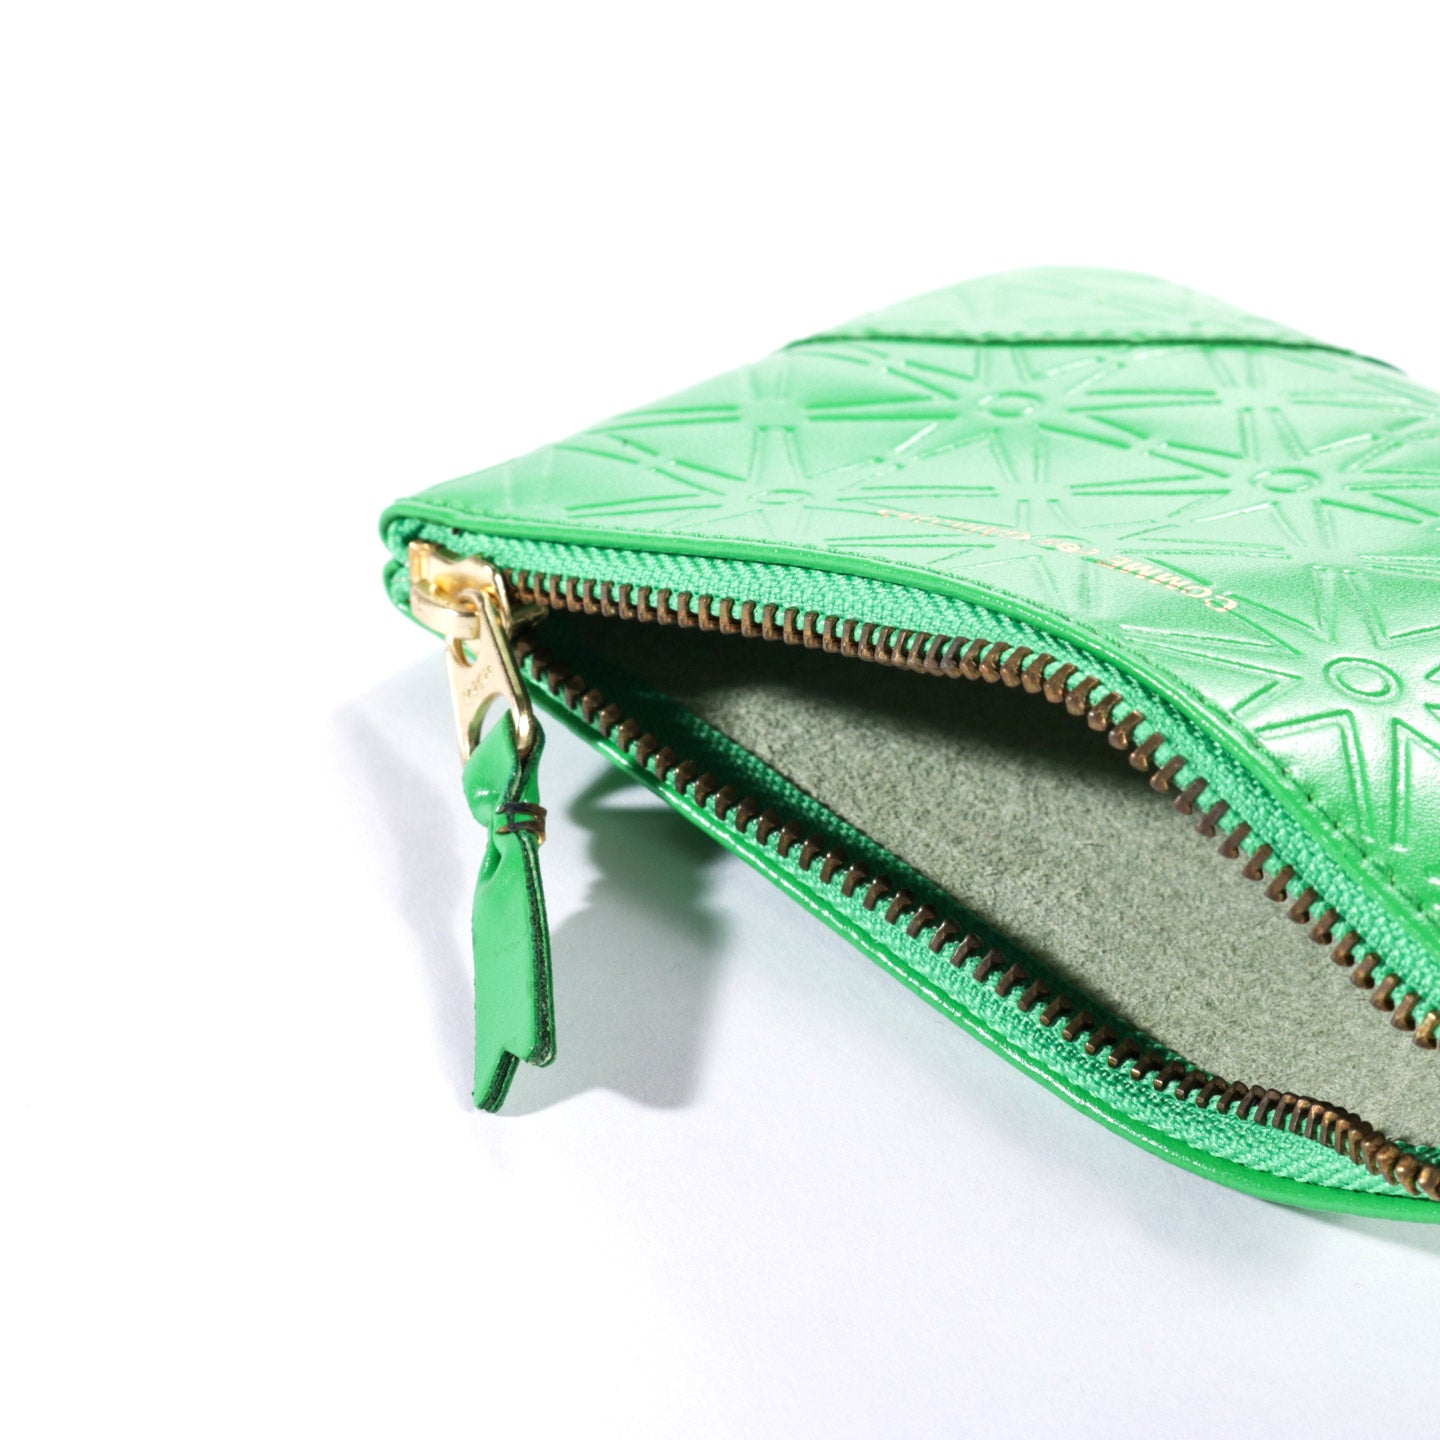 COMME DES GARCONS SA810E EMBOSSED LEATHER ZIP WALLET GREEN